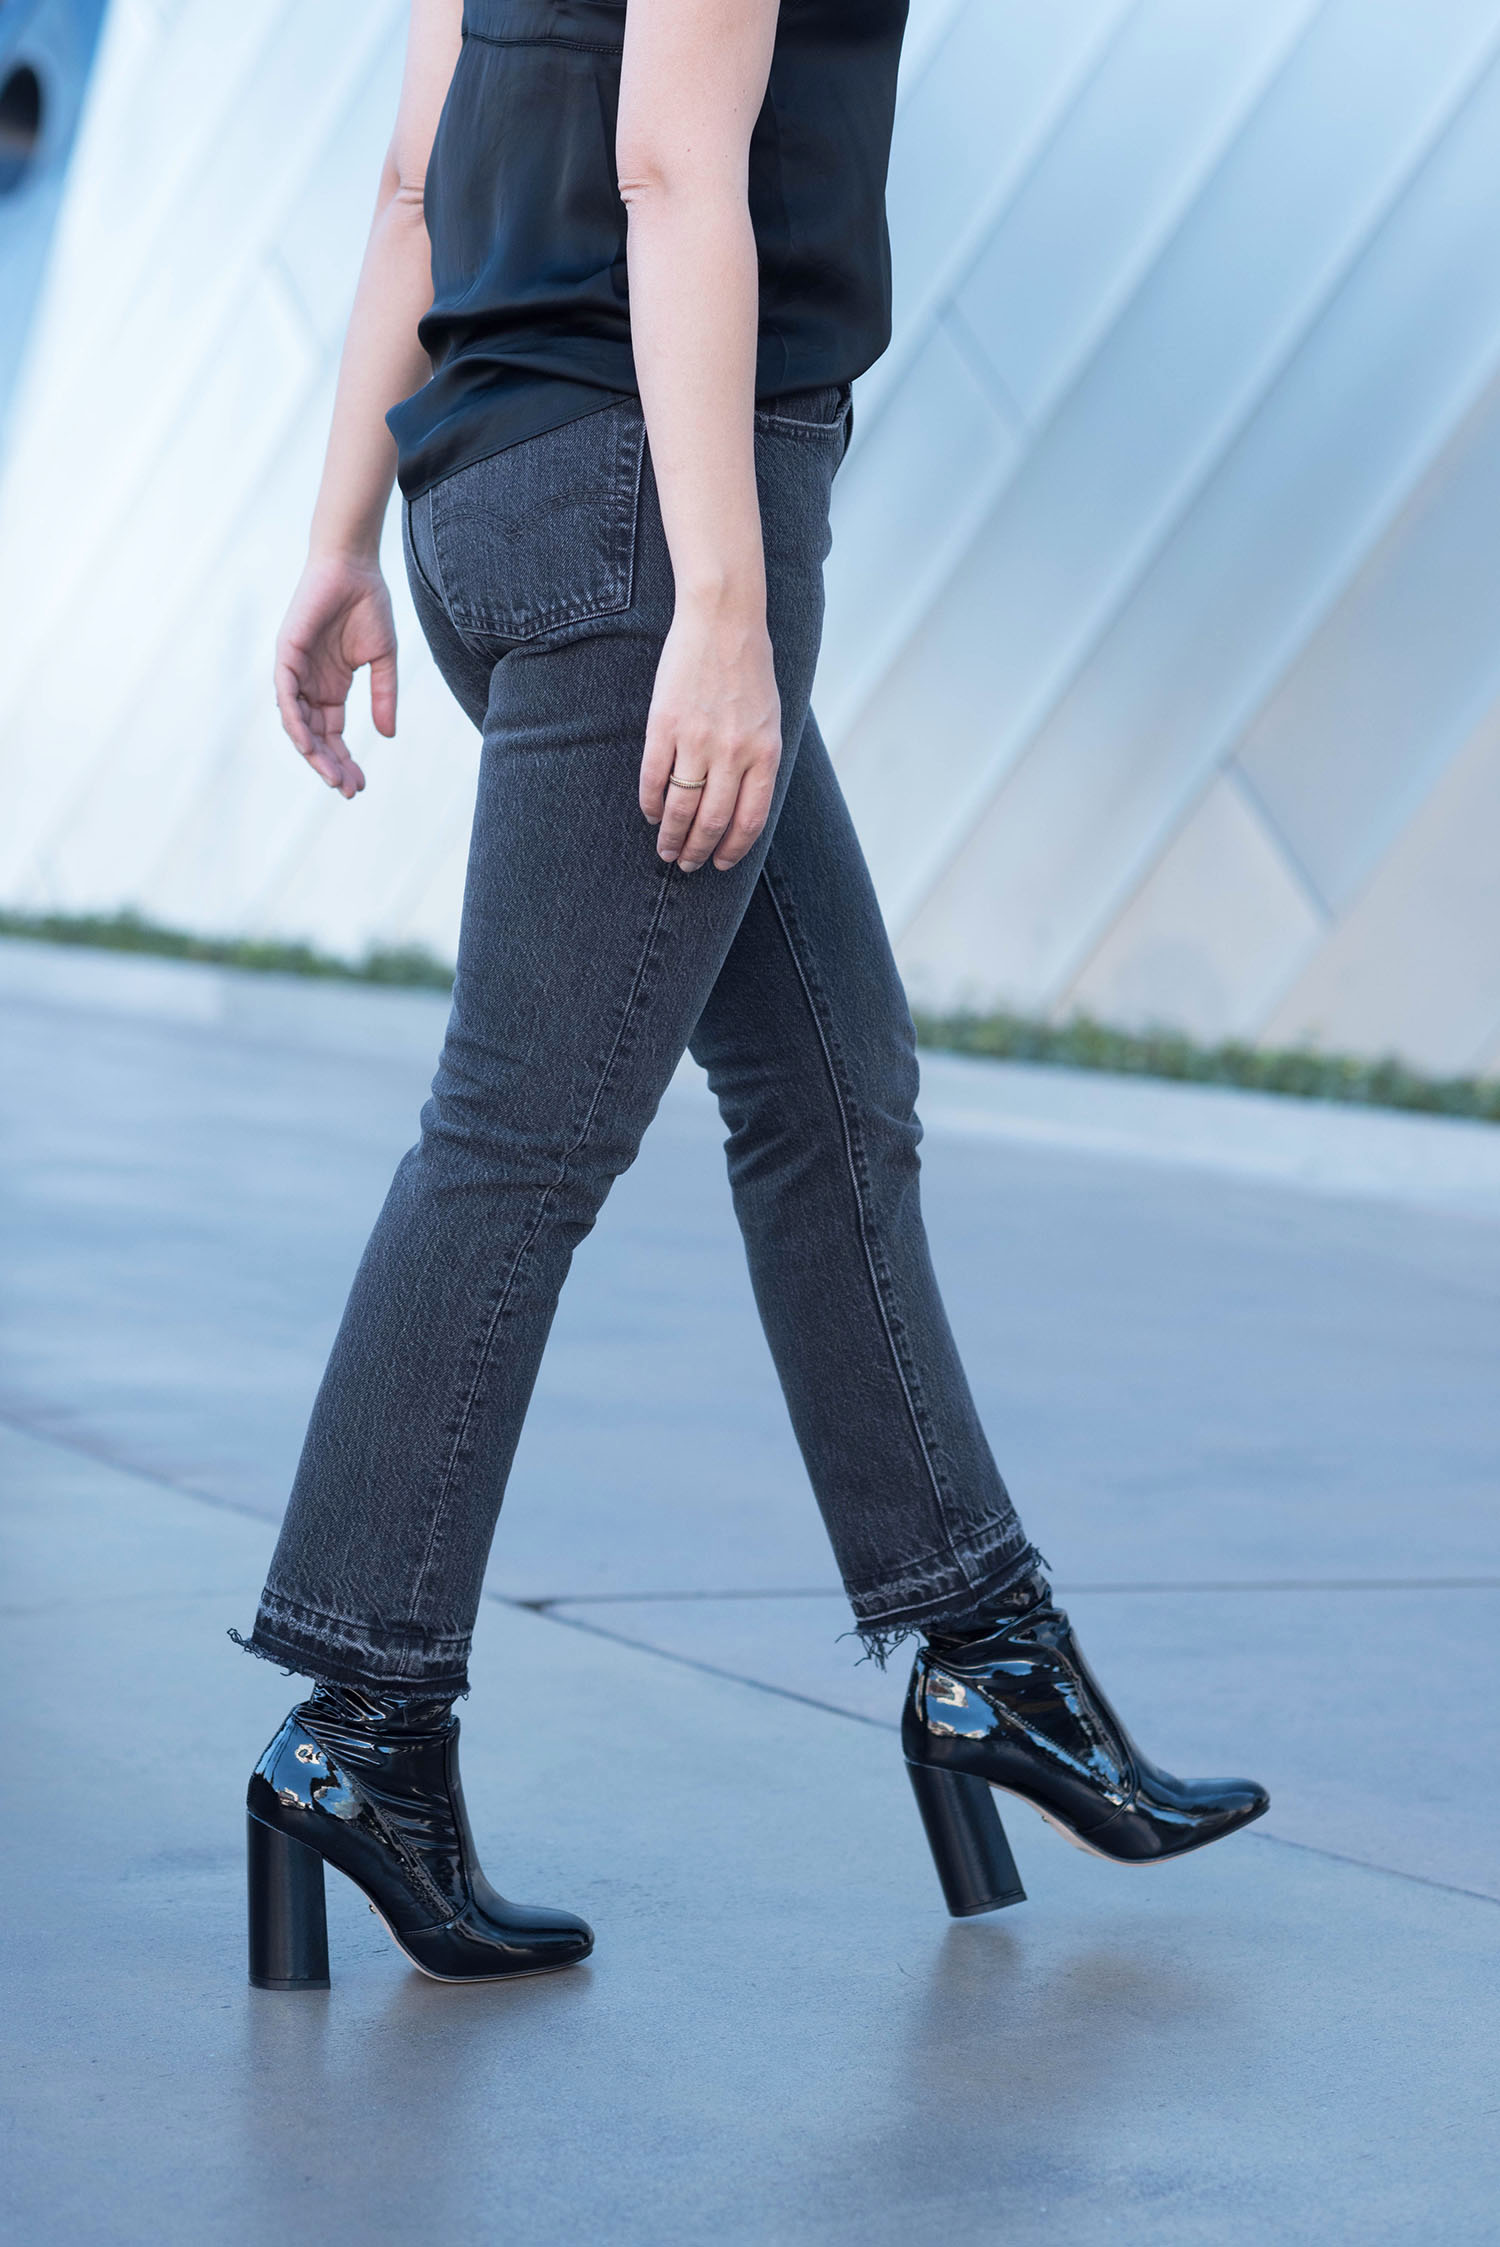 Outfit details on Winnipeg fashion blogger Cee Fardoe of Coco & Vera, including black Levis 501 skinny jeans and Raye patent ankle boots